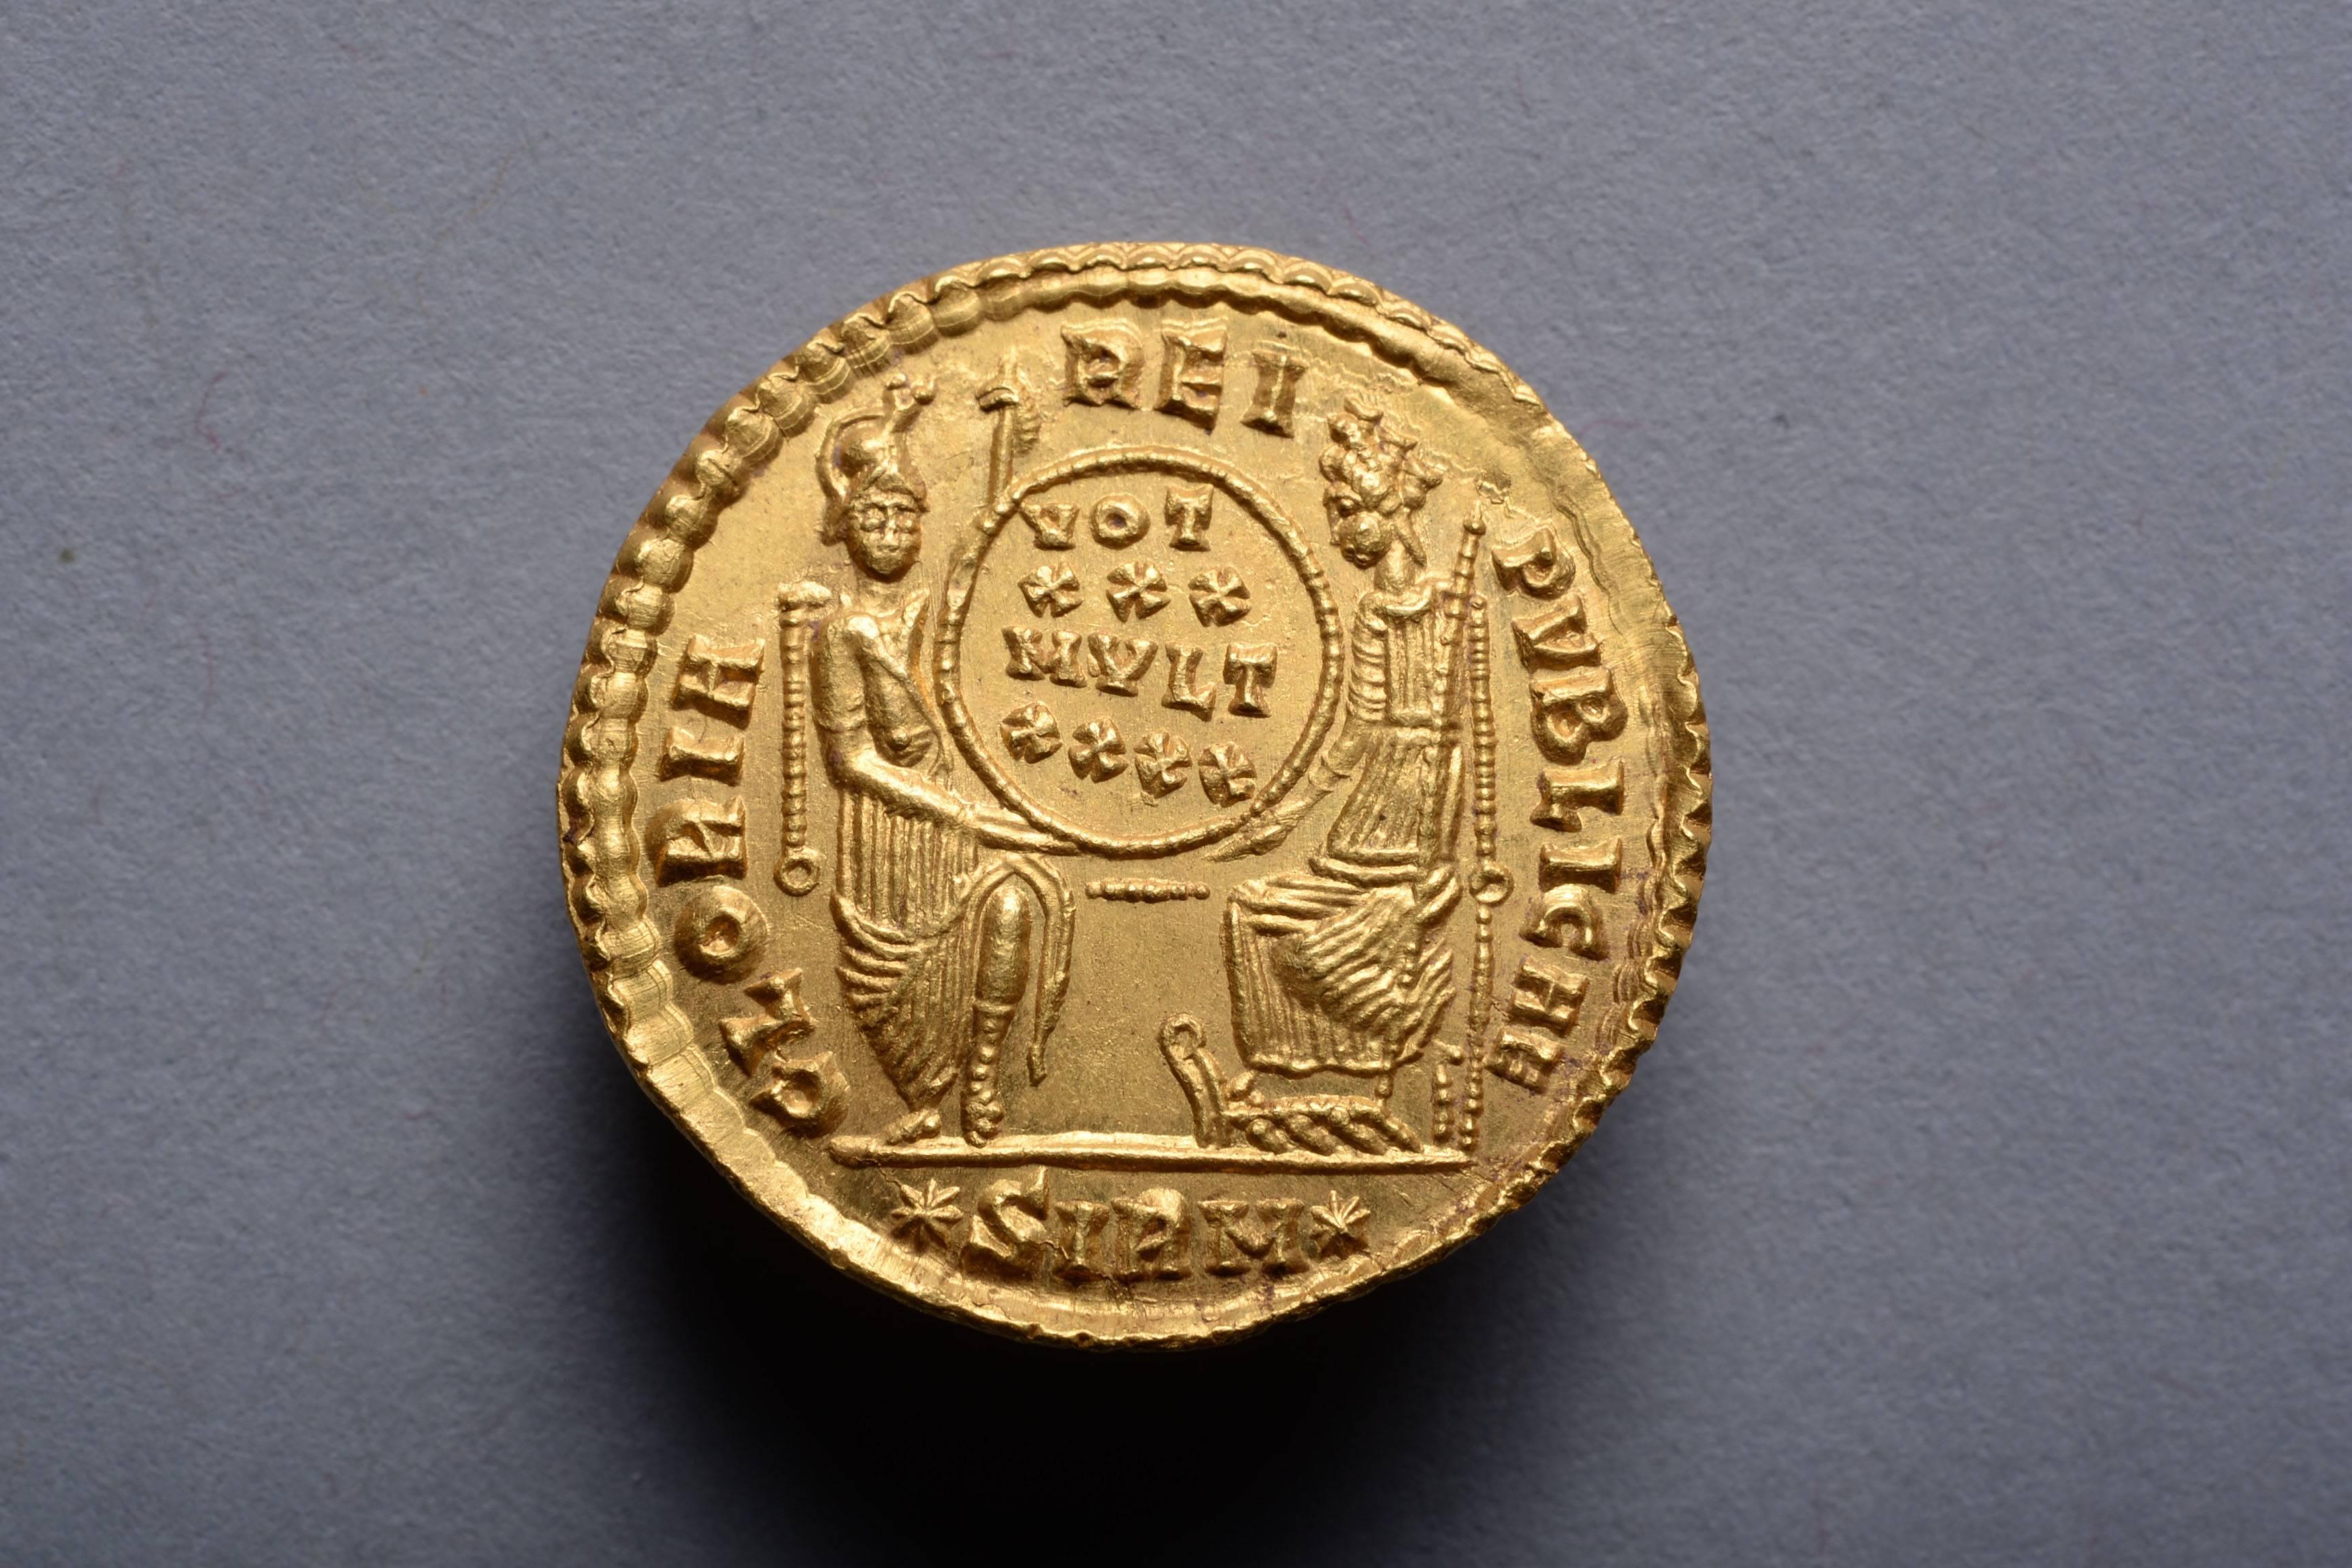 A superb example of ancient Roman gold coinage, in the finest state of preservation. A gold solidus issued under Emperor Constantius II (Flavius Julius Constantius Augustus), at the Sirmium mint, circa 353-354 AD.

The obverse with the Emperor